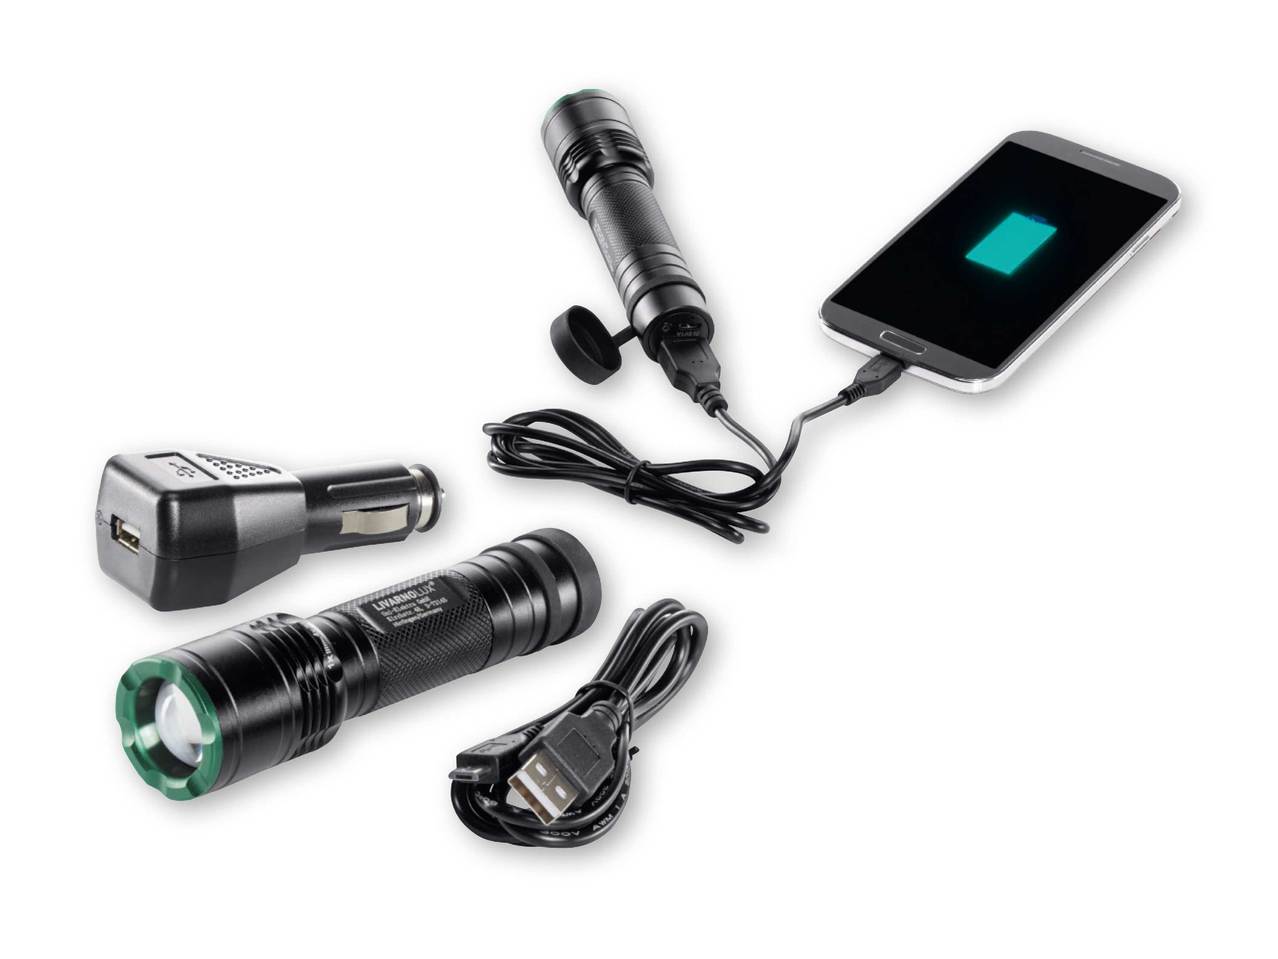 LIVARNO LUX LED Torch with Power Bank - Lidl — Ireland - Specials archive